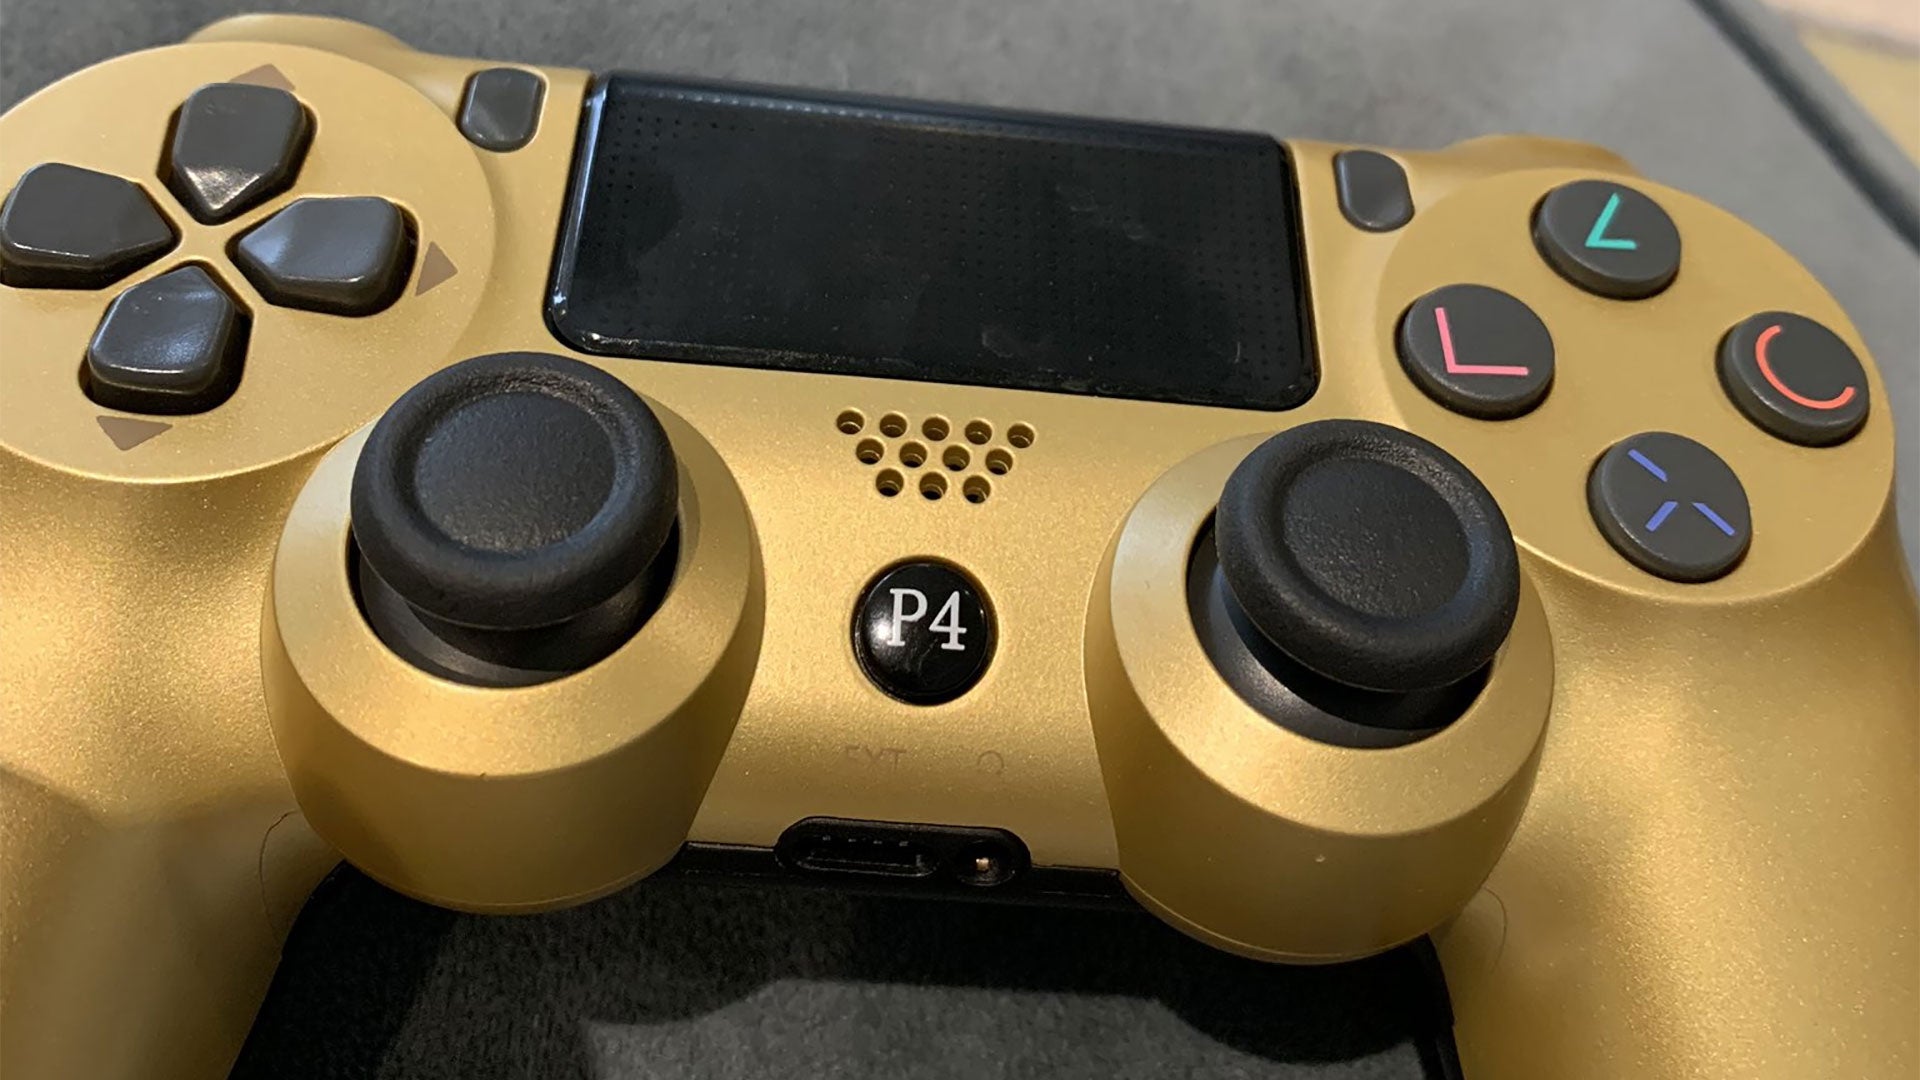 Former White House Press Secretary Blames China After Getting Bamboozled Over Bootleg PS4 Controller